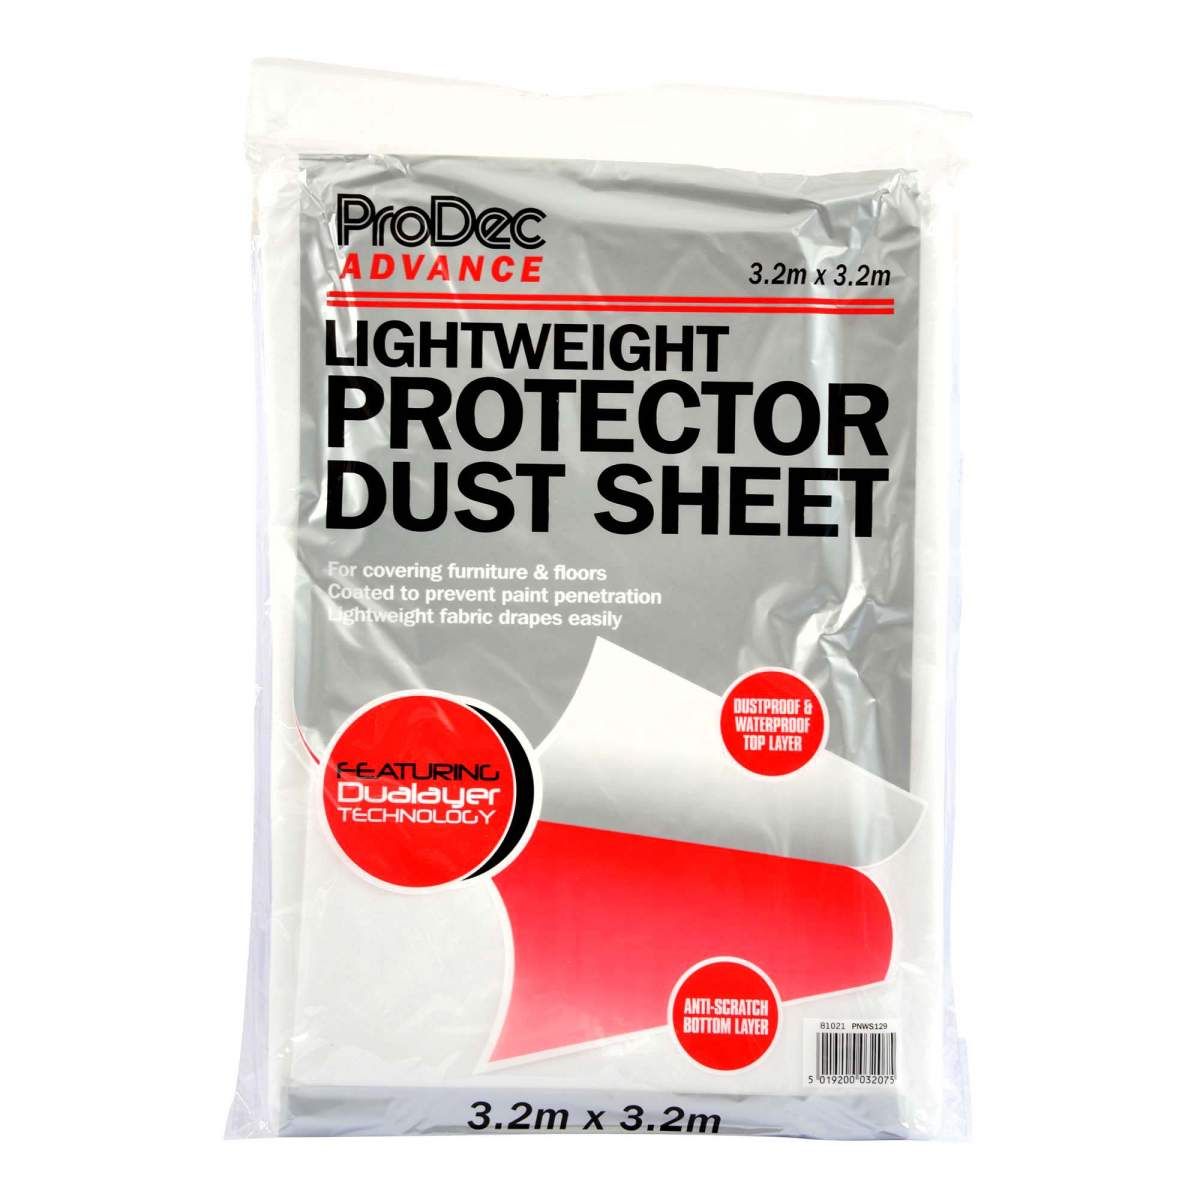 Prodec L/weight Prot Dust Sheet PNWS129 Carpet Protector - by Albany